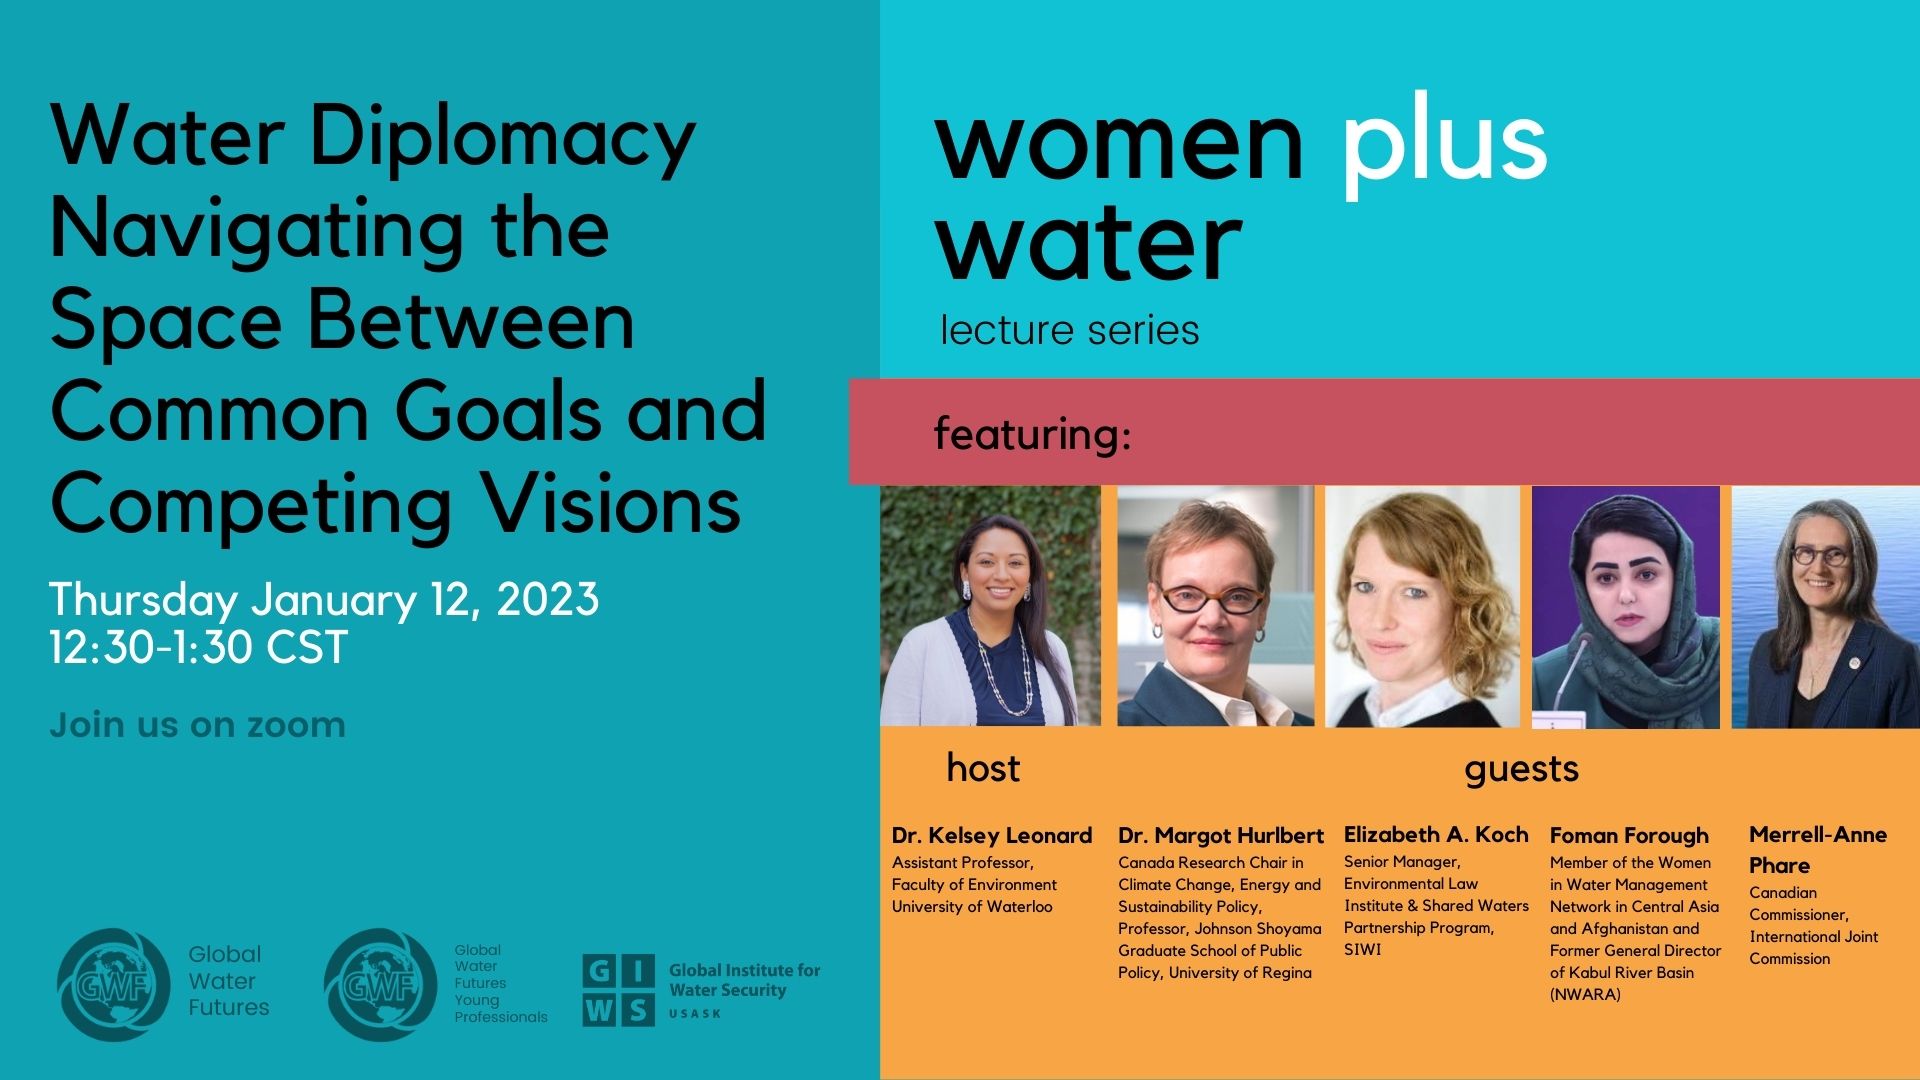 Women Plus Water - Water Diplomacy Navigating the Space Between Common Goals and Competing Visions